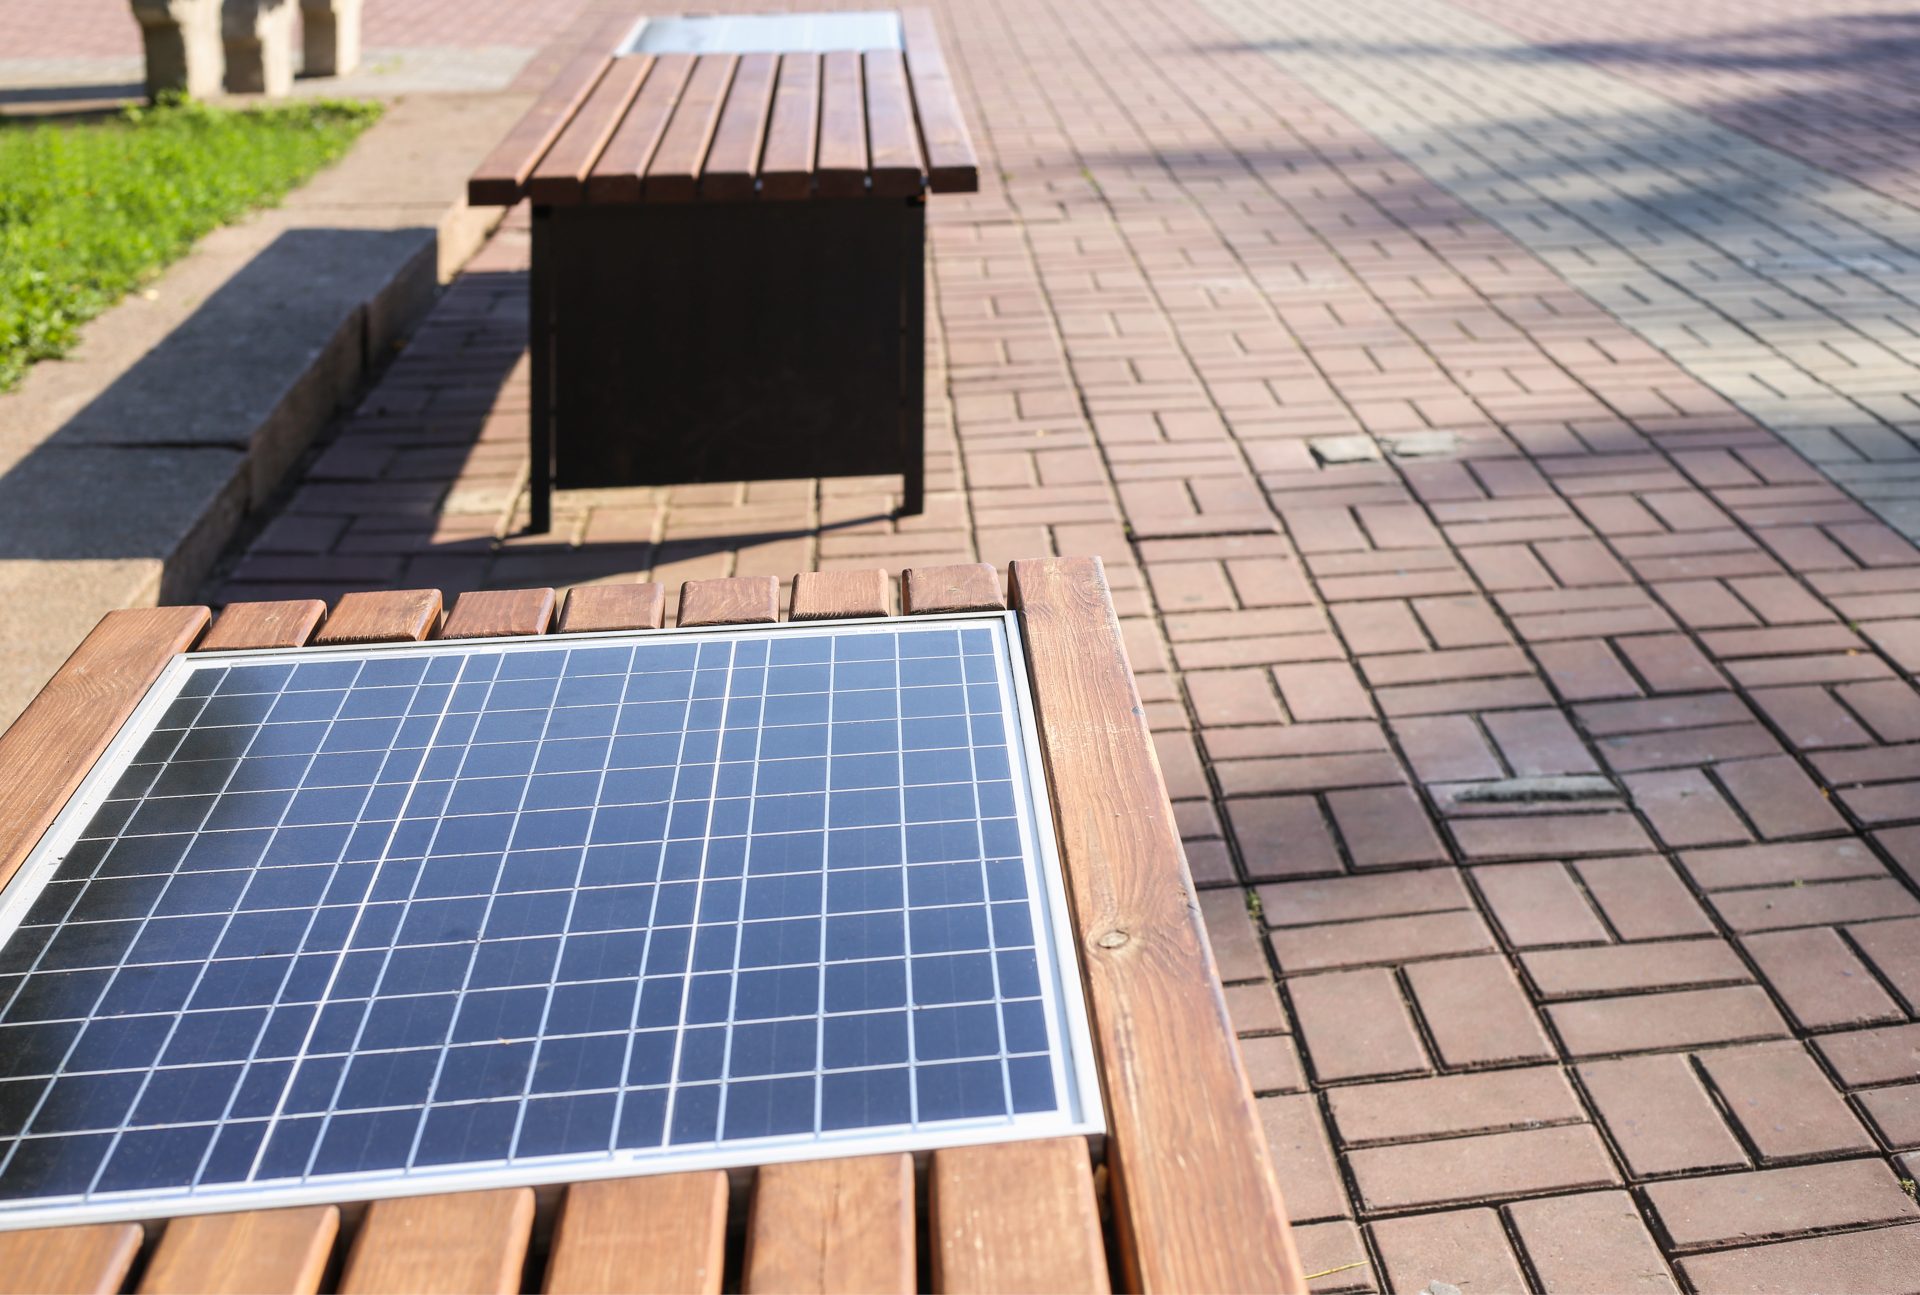 Bench with solar battery to power wifi and charge mobile devices